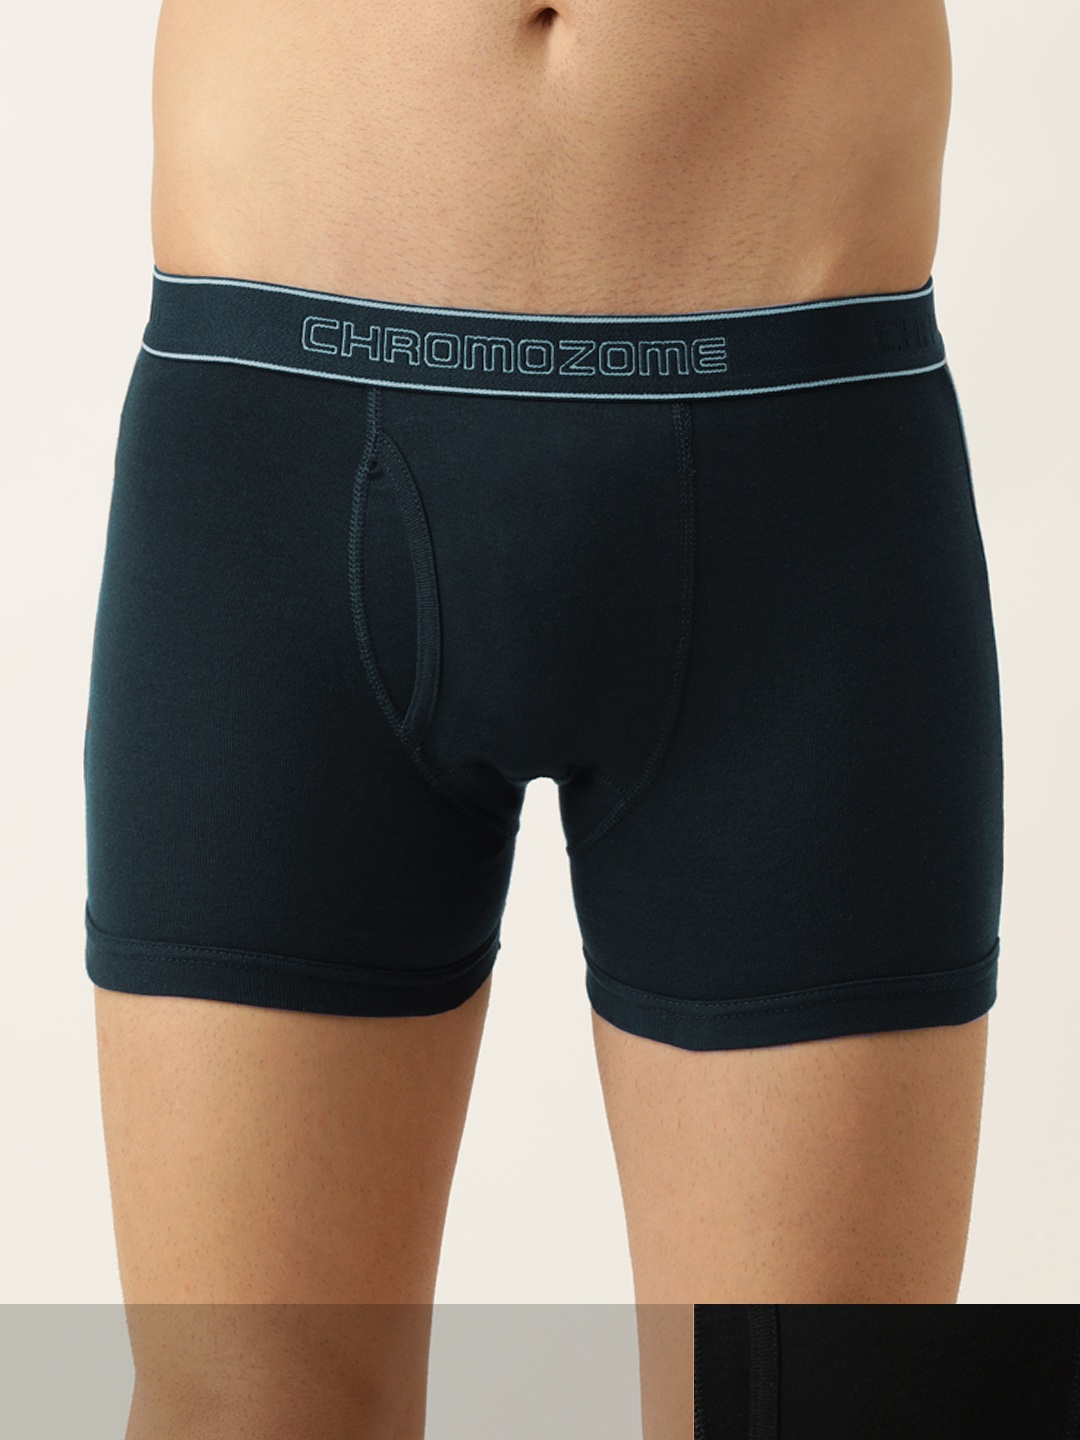 

Chromozome Preactive Men Pack of 2 Solid Pure Cotton Trunks 8902733577175-V109, Navy blue